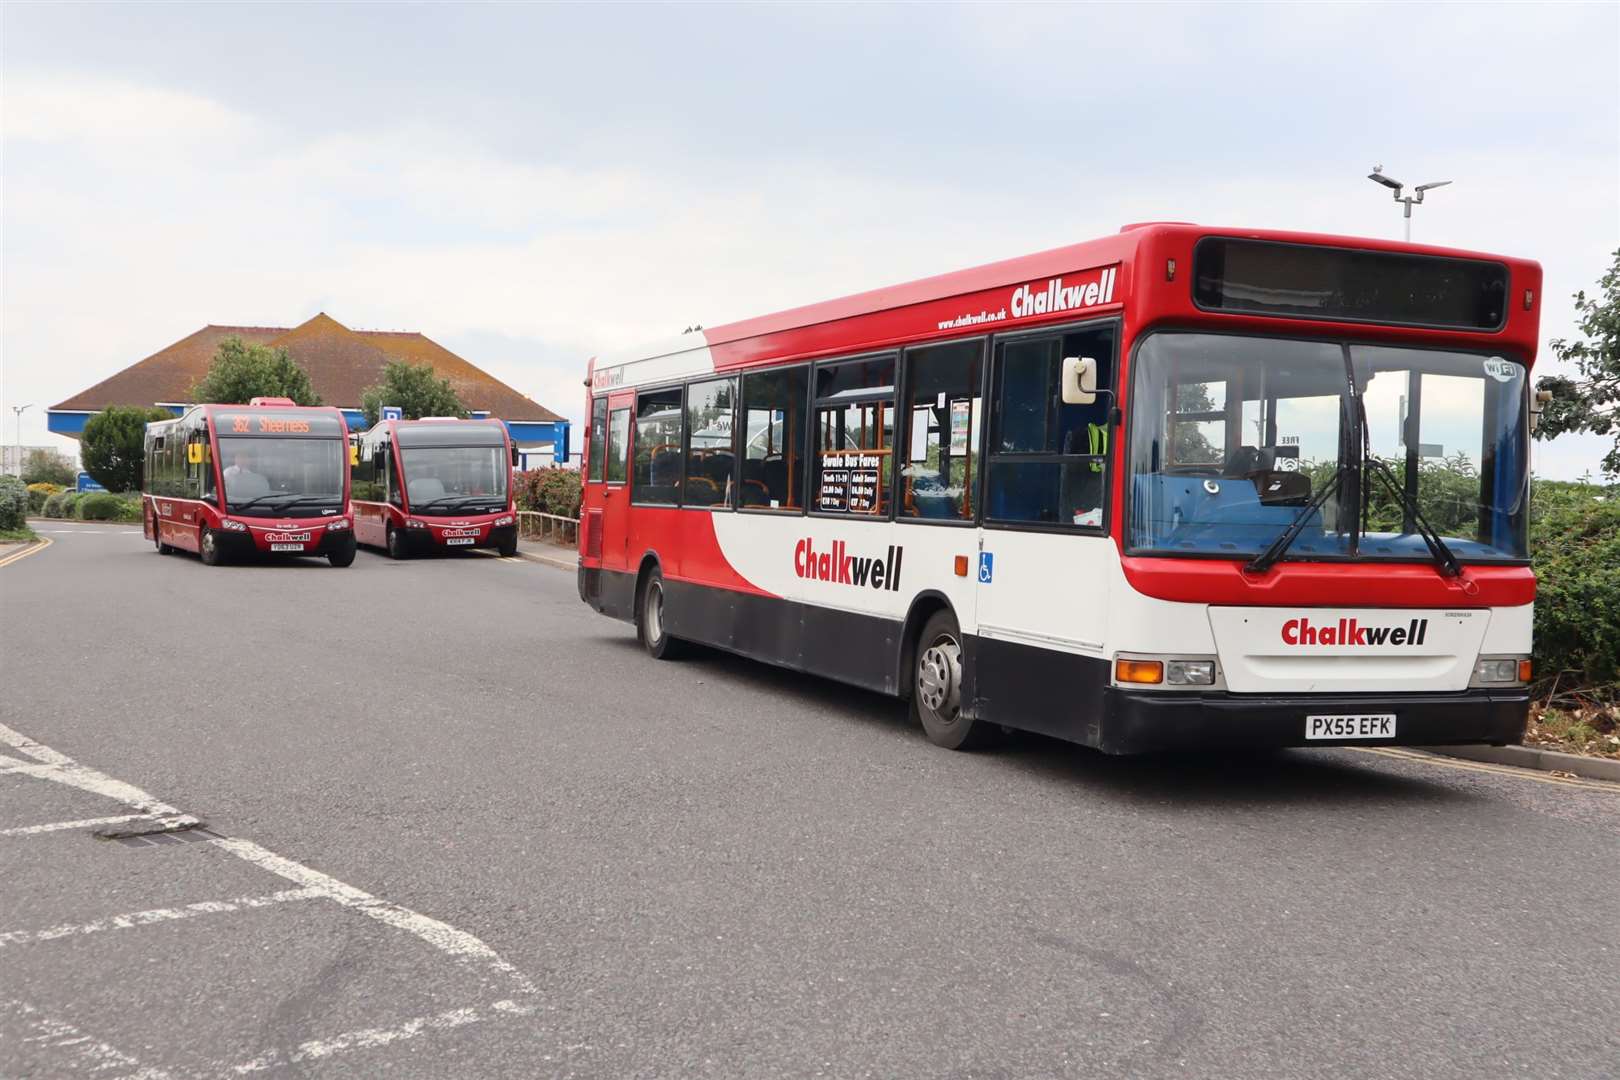 Chalkwell buses now operating on Sheppey picking up passengers at Tesco, Sheerness